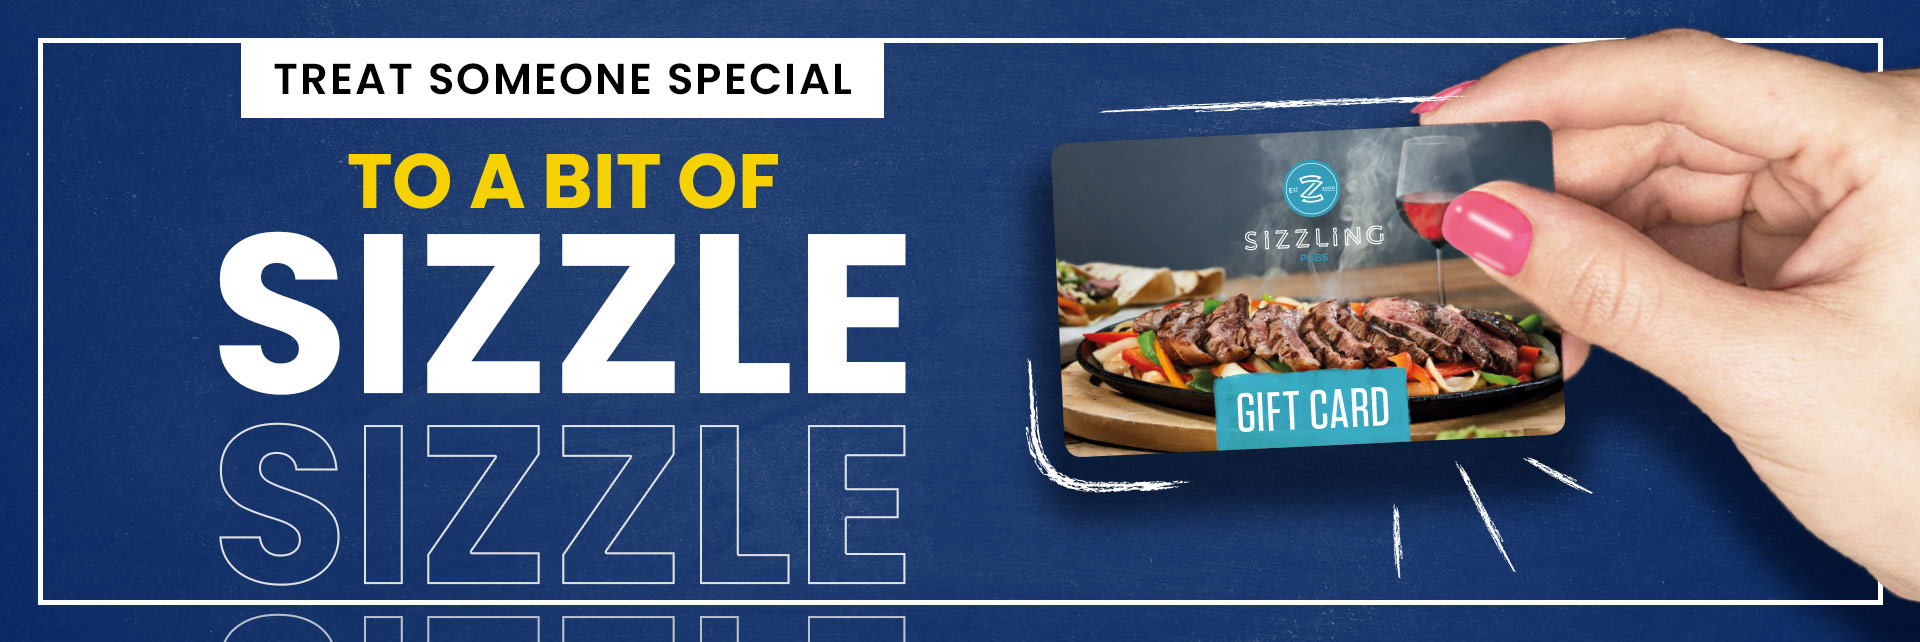 Sizzling Pubs Gift Card at The Crow's Nest in Cwmbran